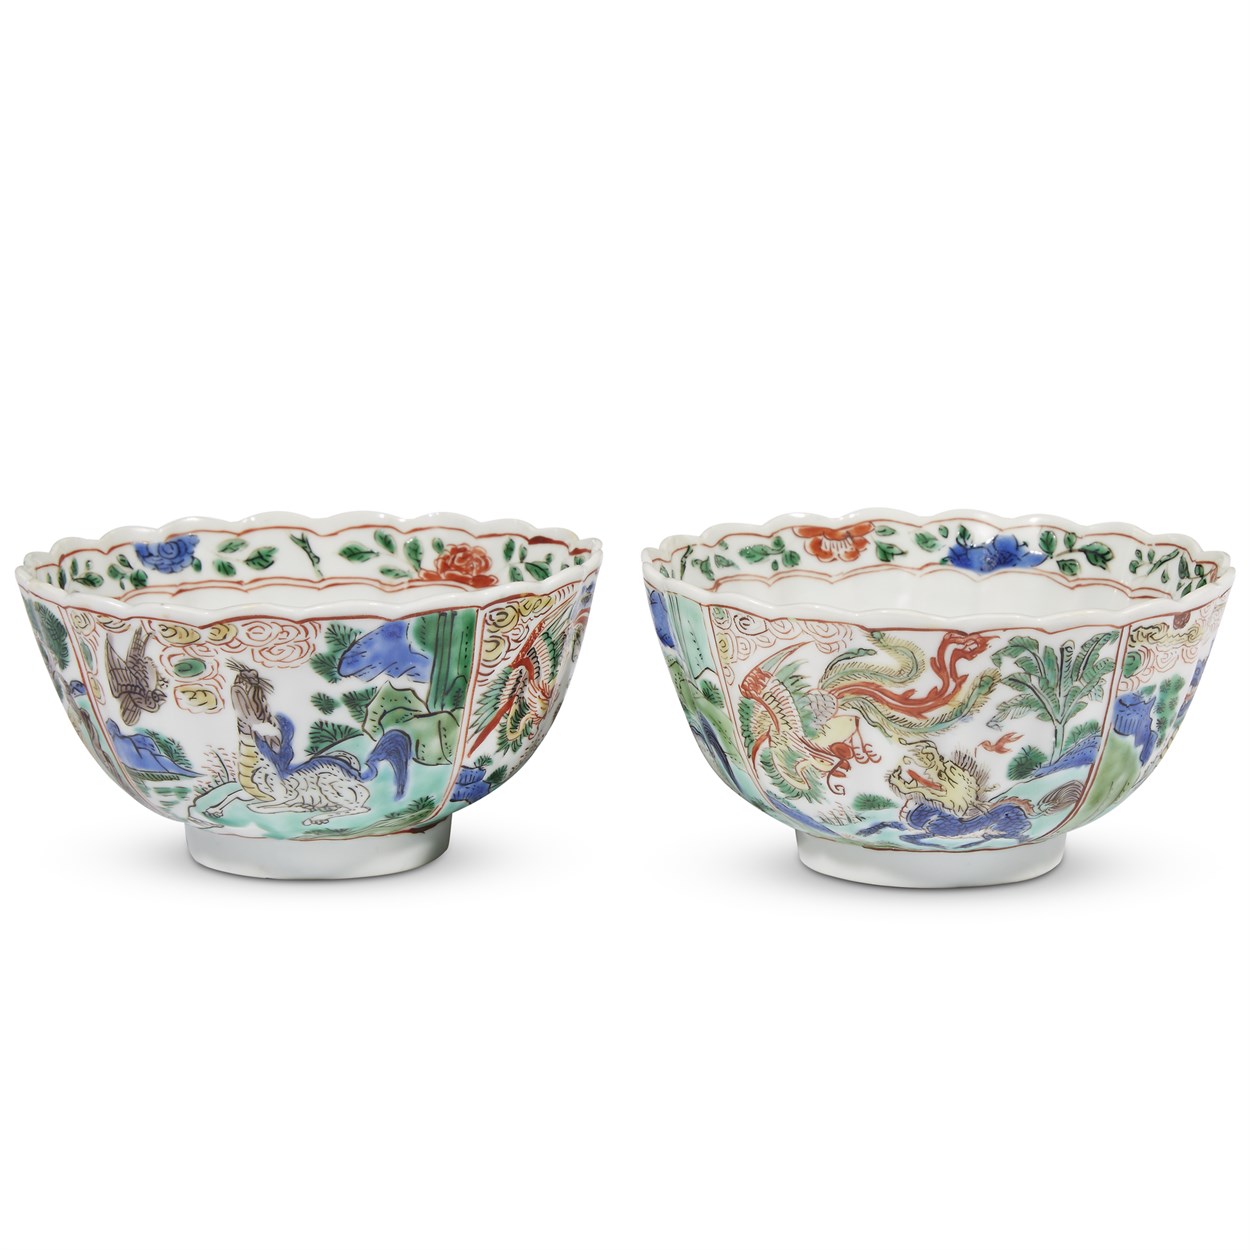 Lot 103 - A pair of Chinese famille verte-decorated "Auspicious Creatures" fluted bowls